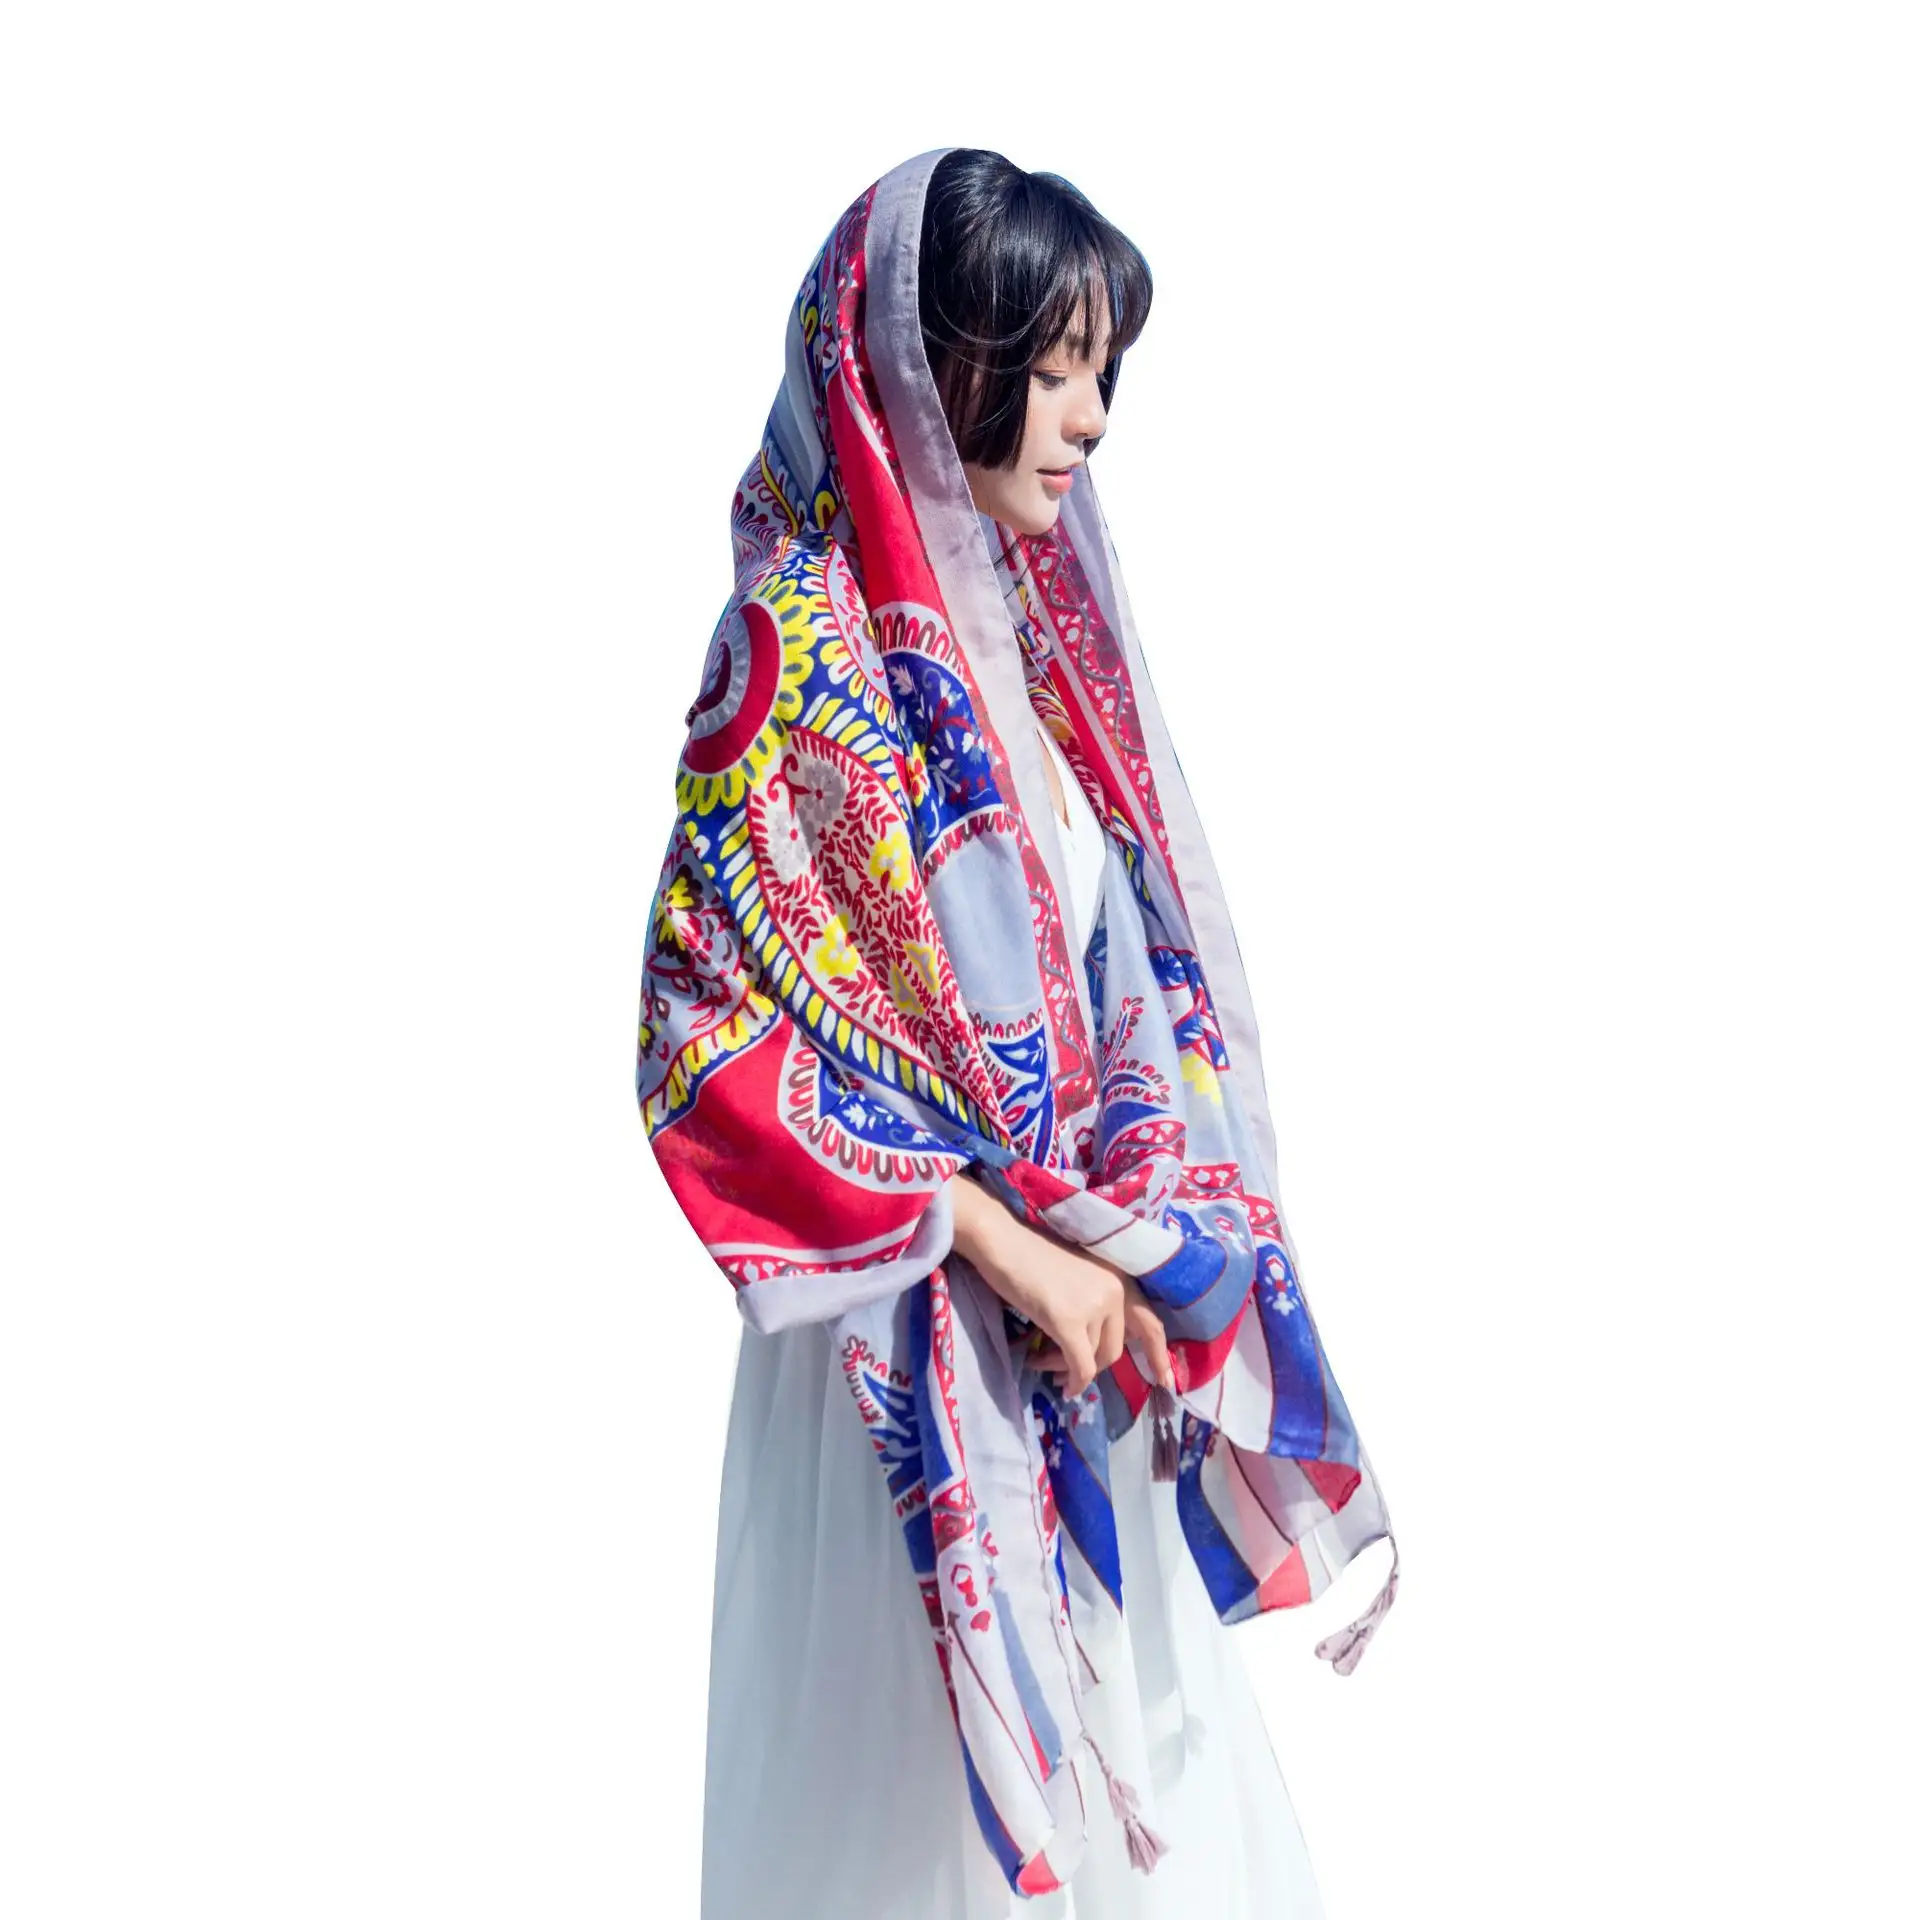 New fancy women elegant flower print scarves stoles ethnic style ladies soft long floral printed cotton scarves shawls for women